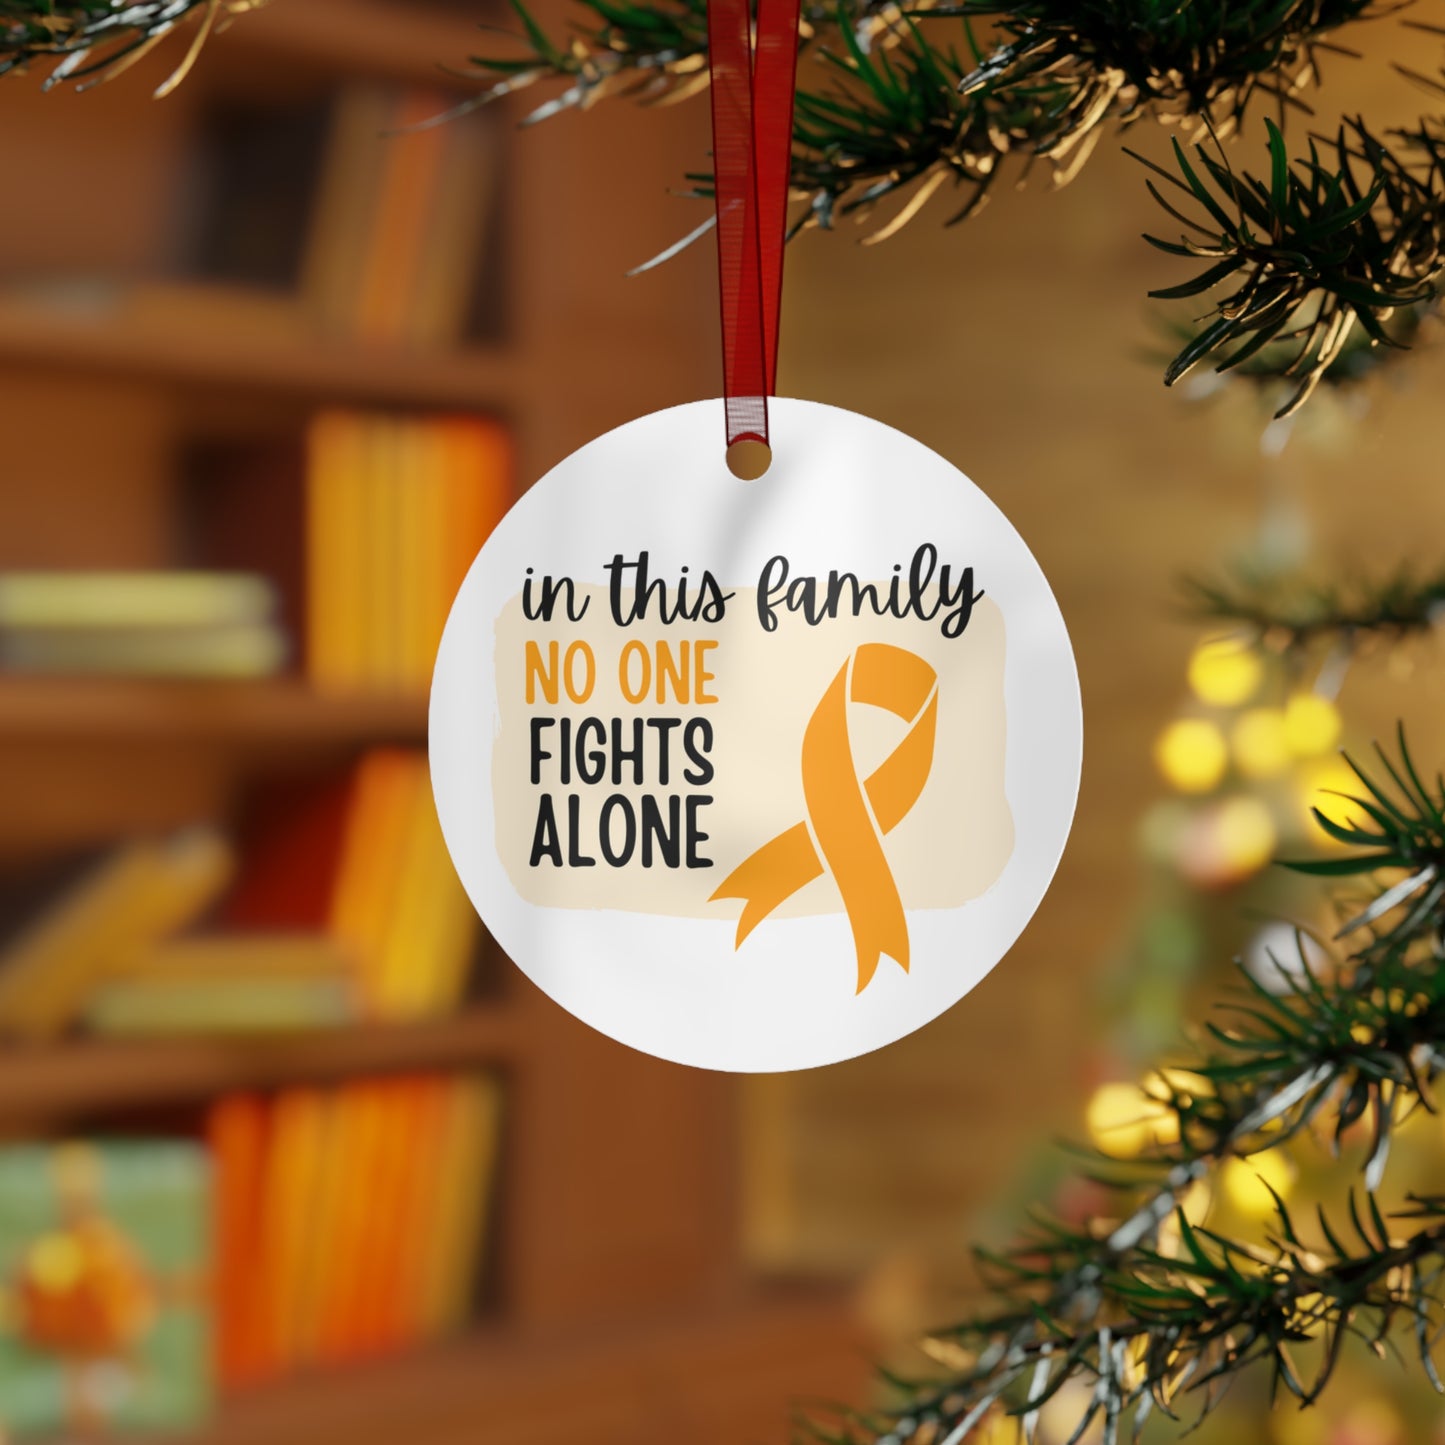 Leukemia Orange Ribbon Awareness Ornament -In this family no one fights alone- Family Support - Support for friend